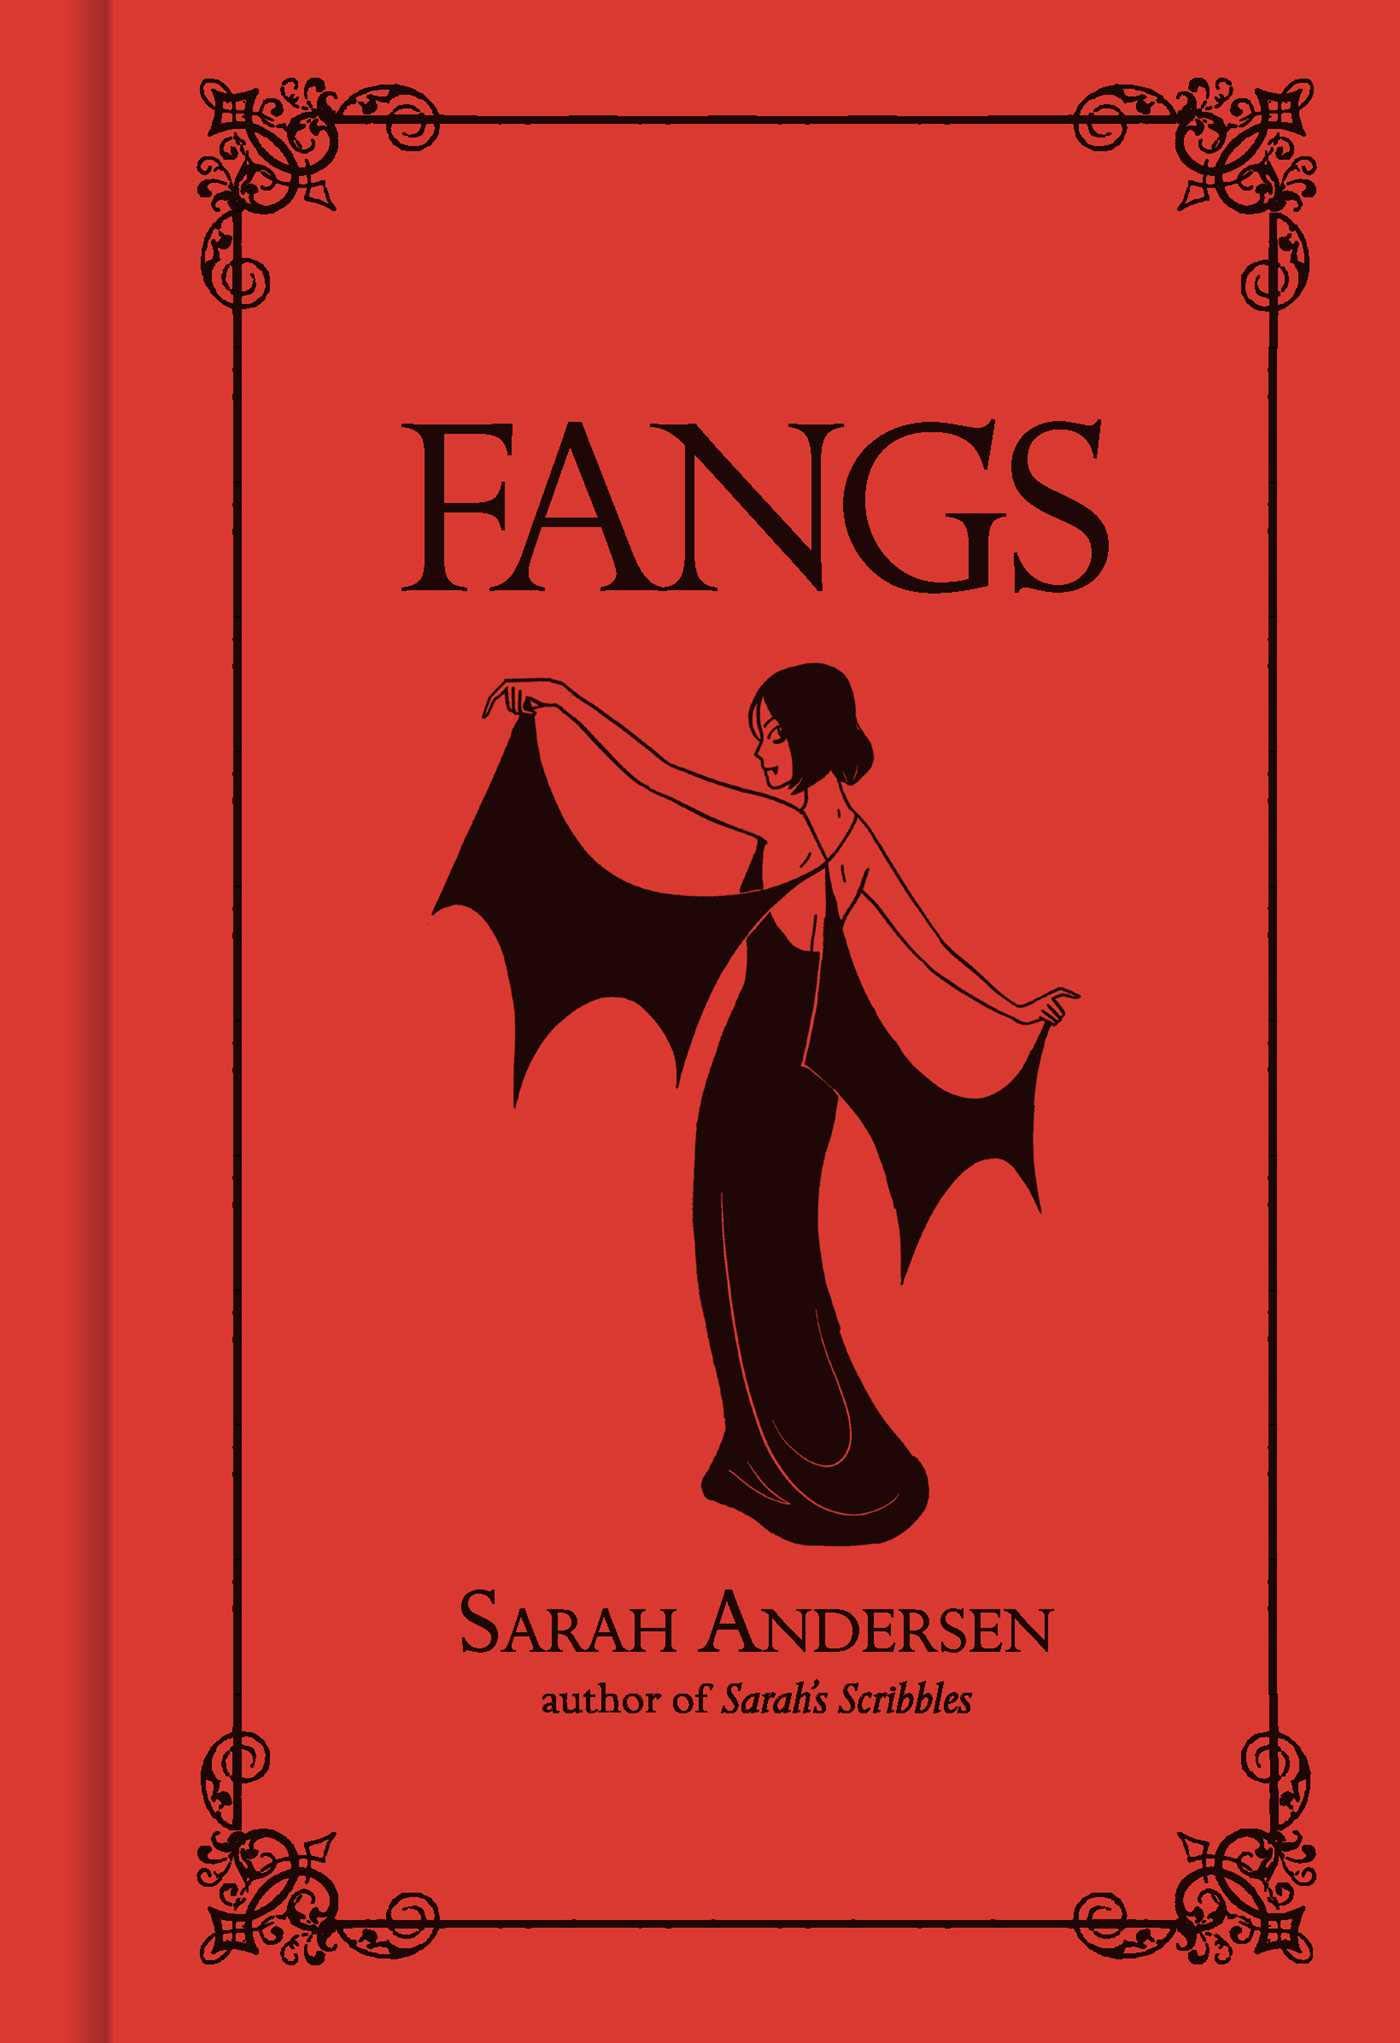 Image for "Fangs"